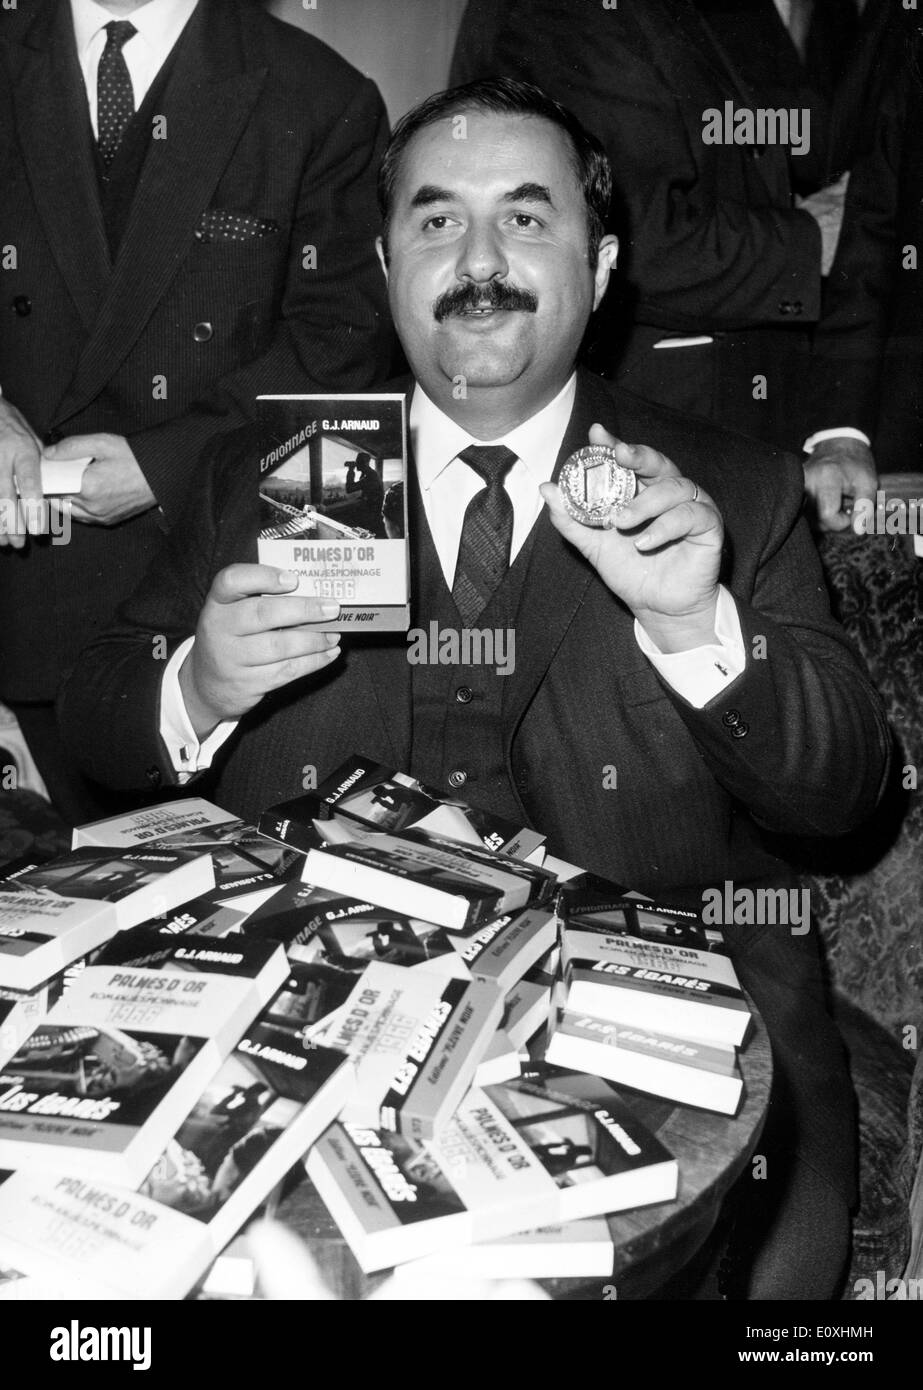 Oct 26, 1966; Paris, France; The annual award of the 'Palmes D'Or' (Golden Palm) for the best spy novel of the year went to J. Arnaud for his book 'Les Egares' (The Lost Ones). The picture shows GEORGES J. ARNAUD showing his book and medal. Stock Photo